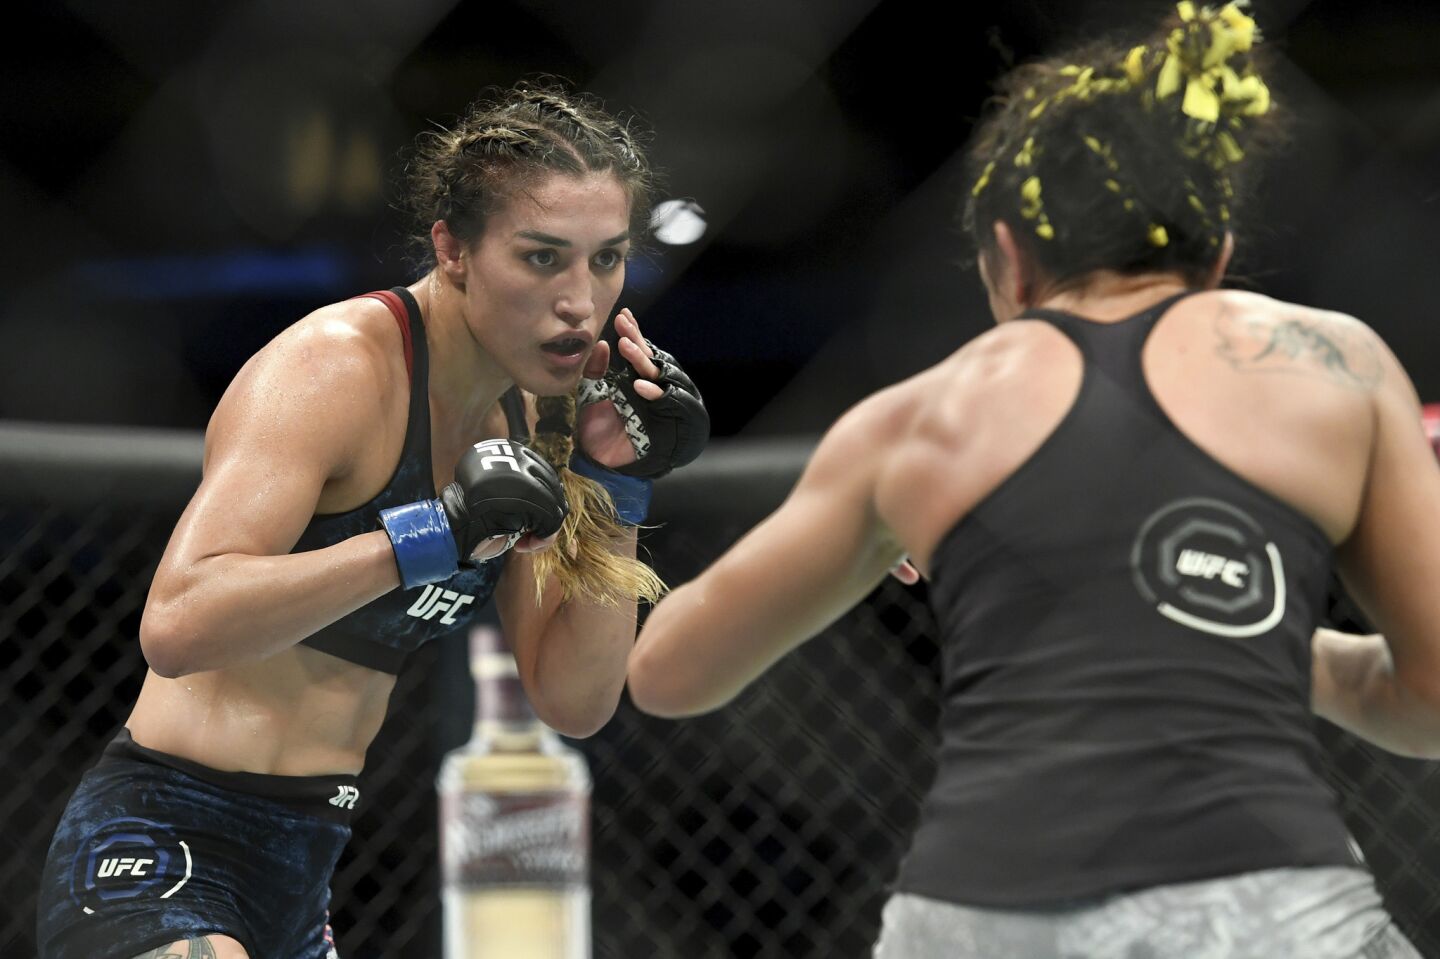 Tatiana Suarez, left, spars with Carla Esparza during their strawweight mixed martial arts bout at UFC 228 on Saturday, Sept. 8, 2018, in Dallas. (AP Photo/Jeffrey McWhorter)